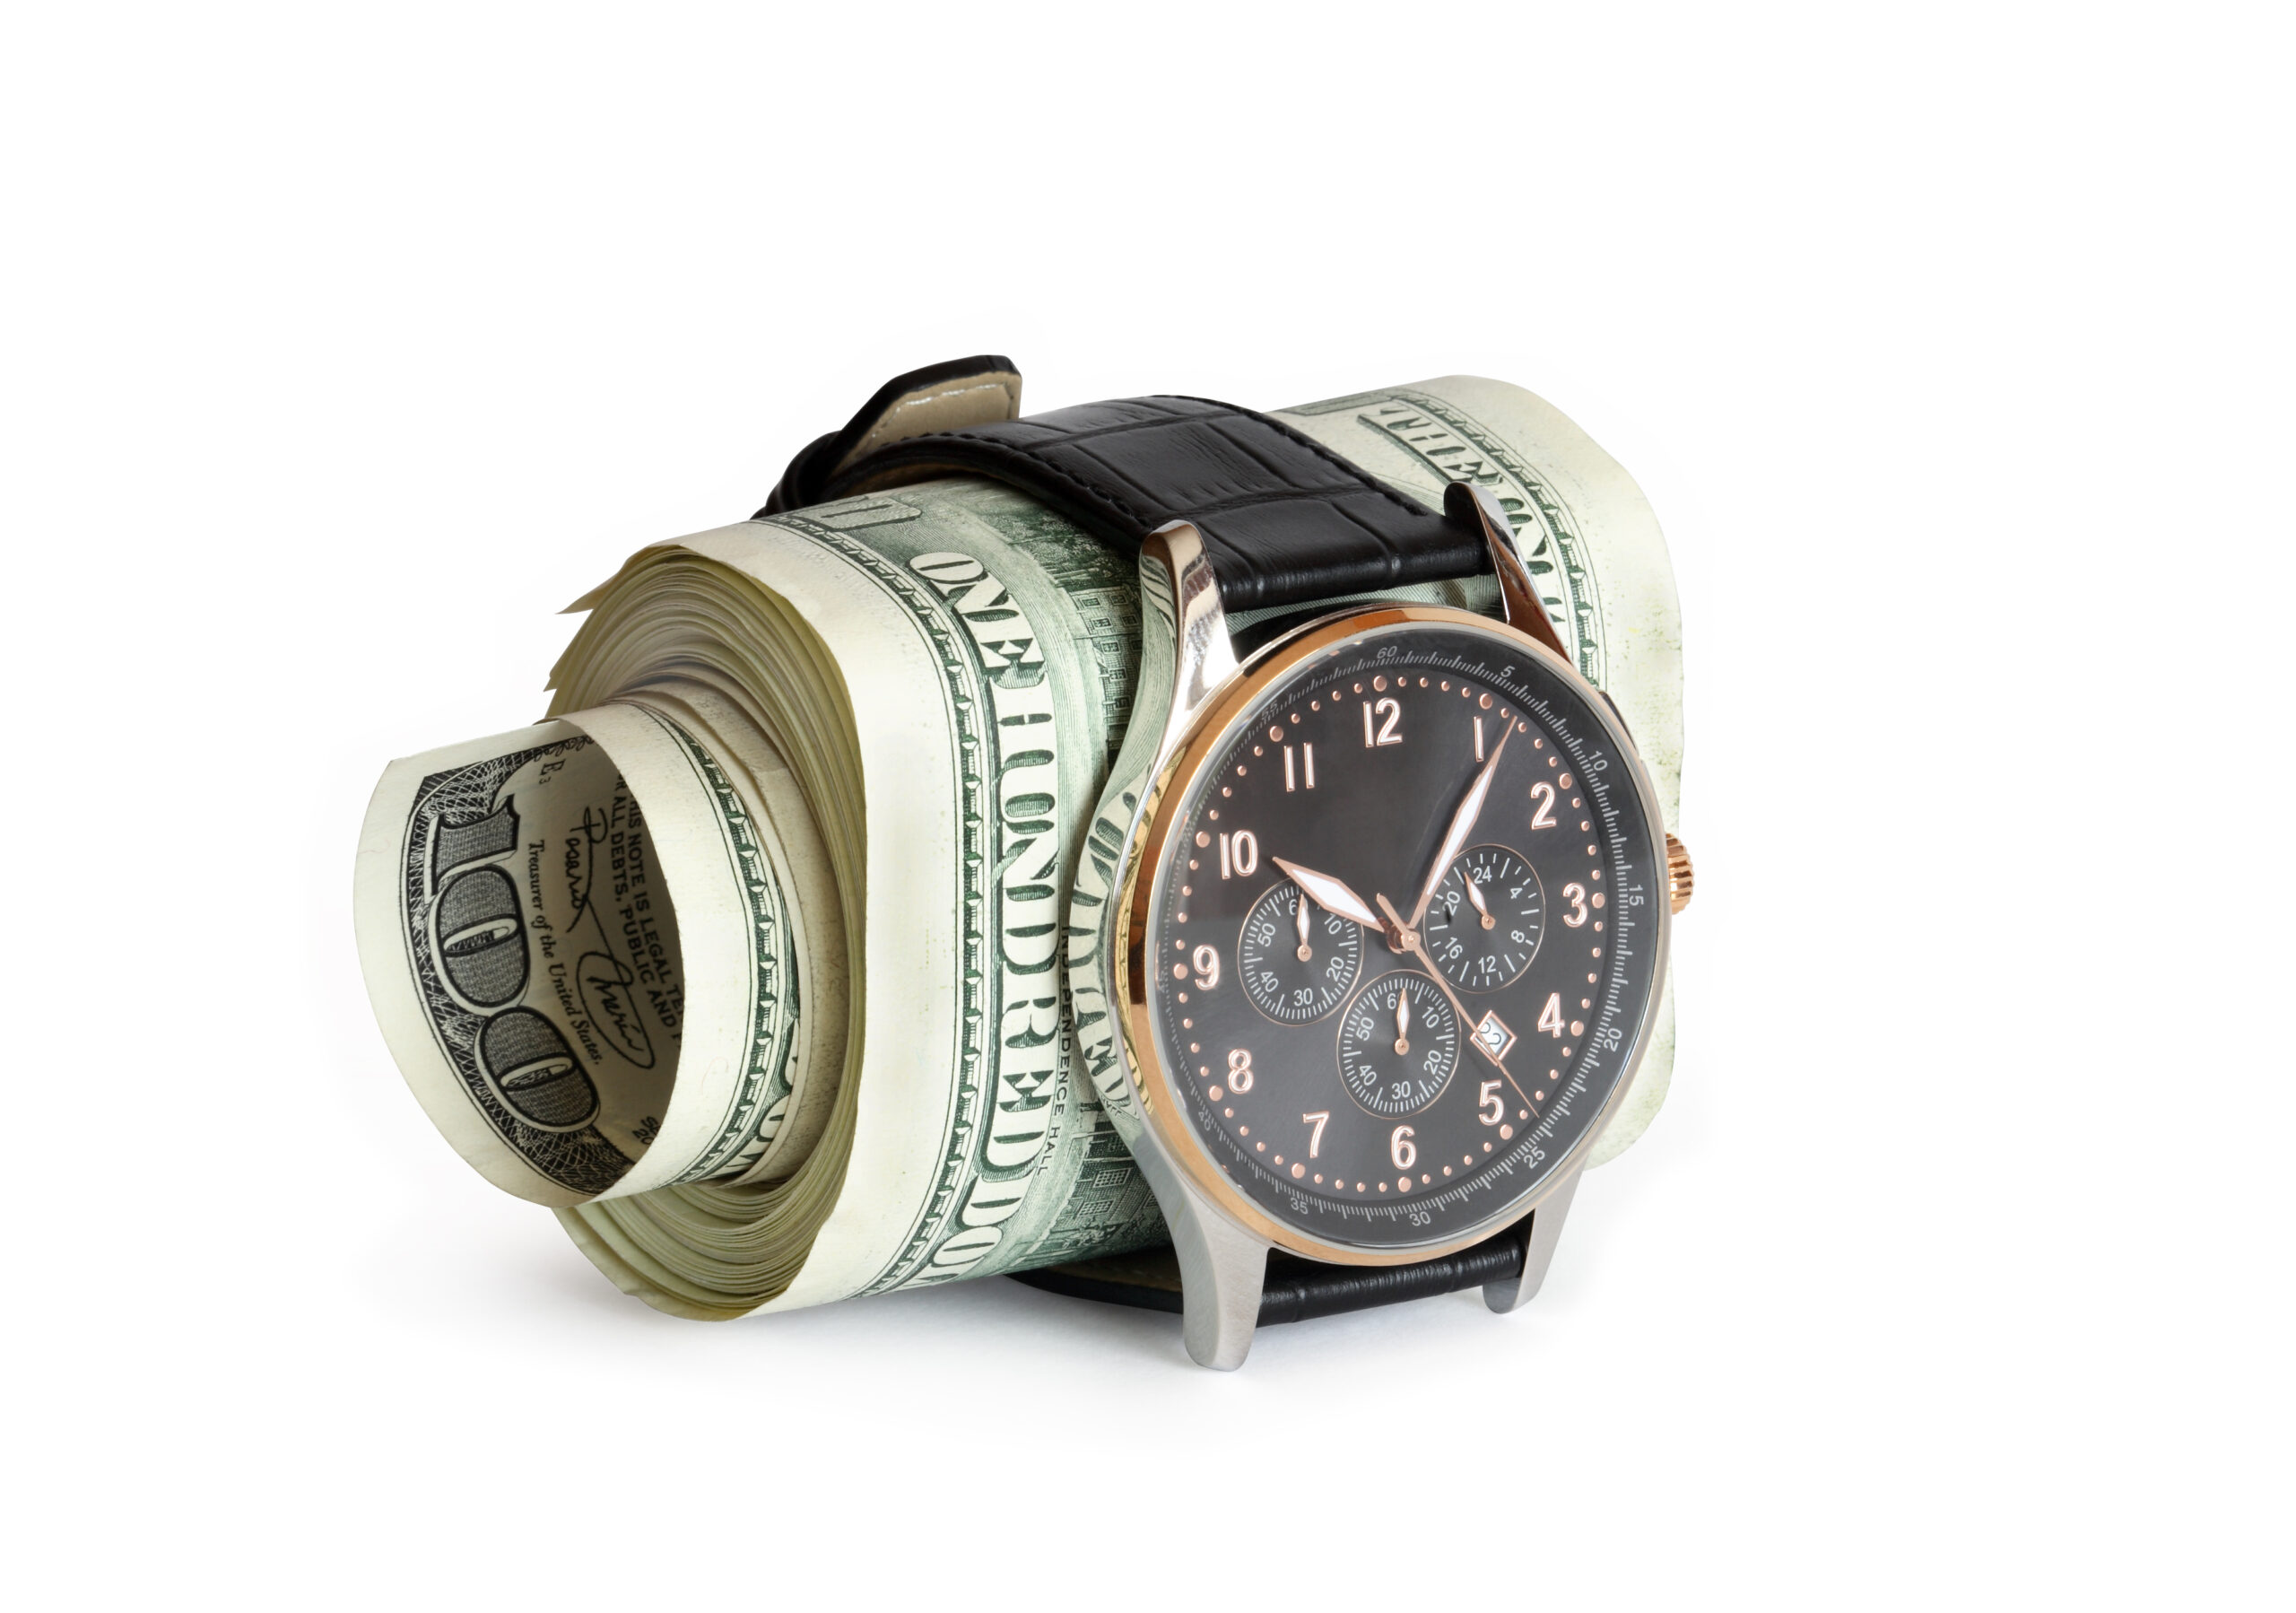 Men's wristwatch wrapped around a roll of one hundred dollar bills